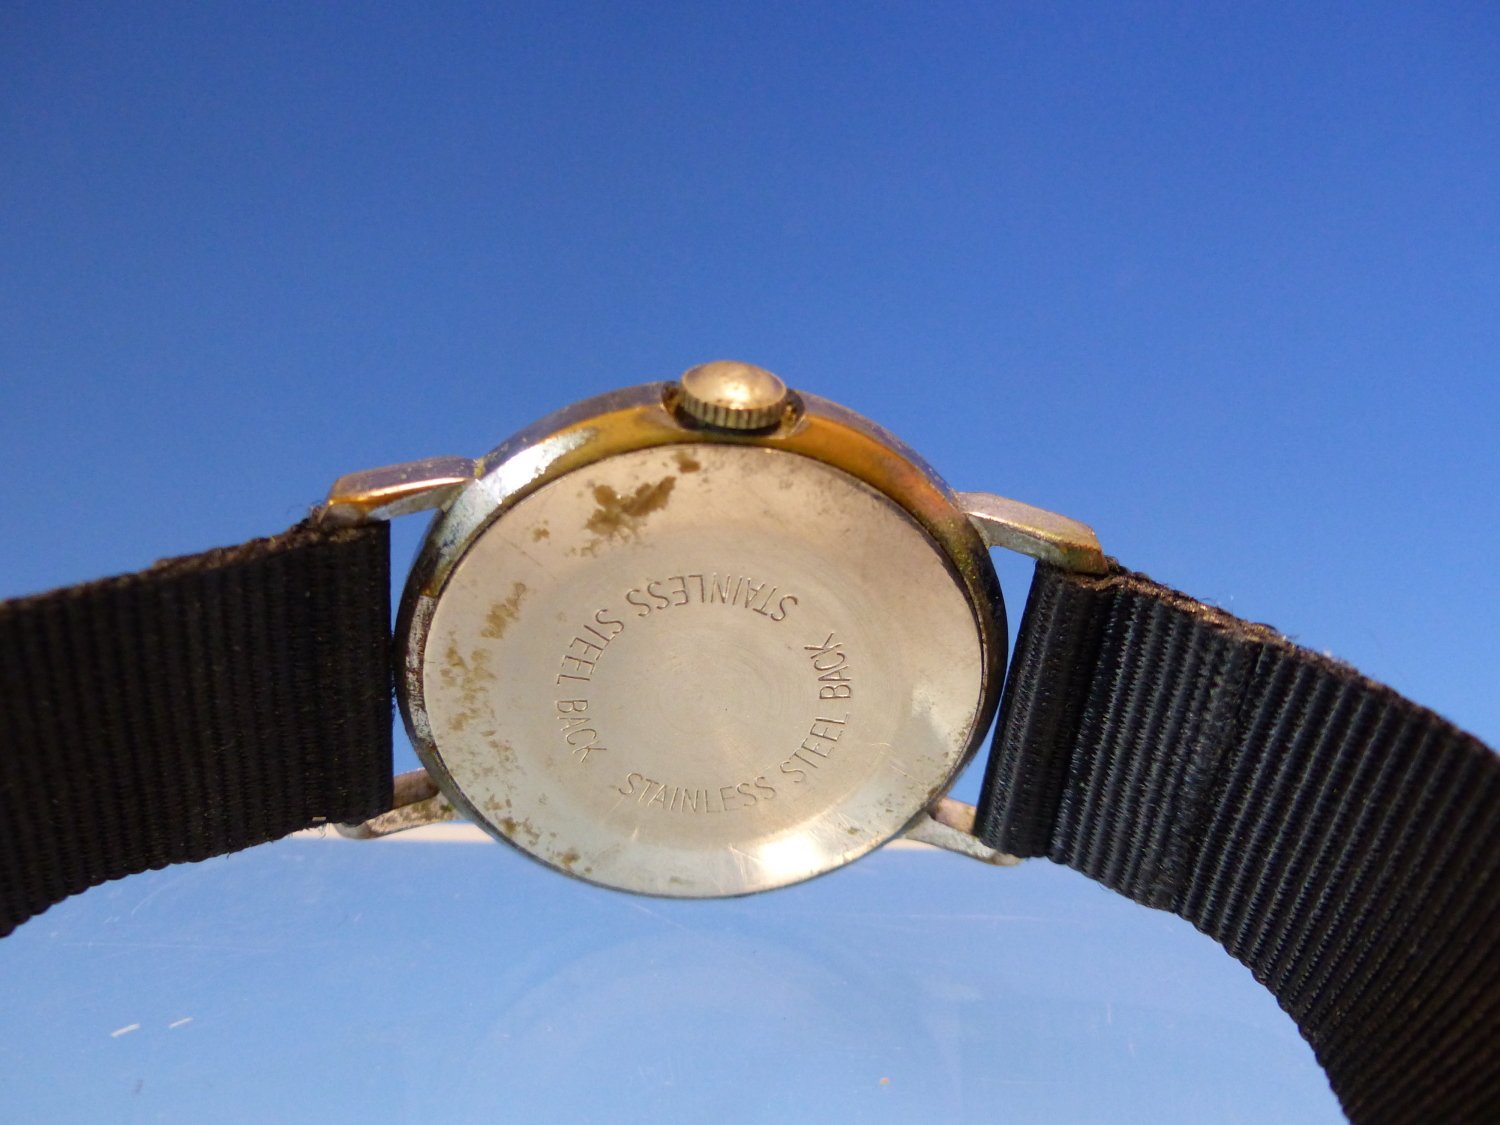 A VINTAGE MANUAL WOUND TIMEX MICKEY MOUSE WRIST WATCH. INCLUDED ARE PHOTOGRAPHS FROM A RECENT - Image 6 of 6